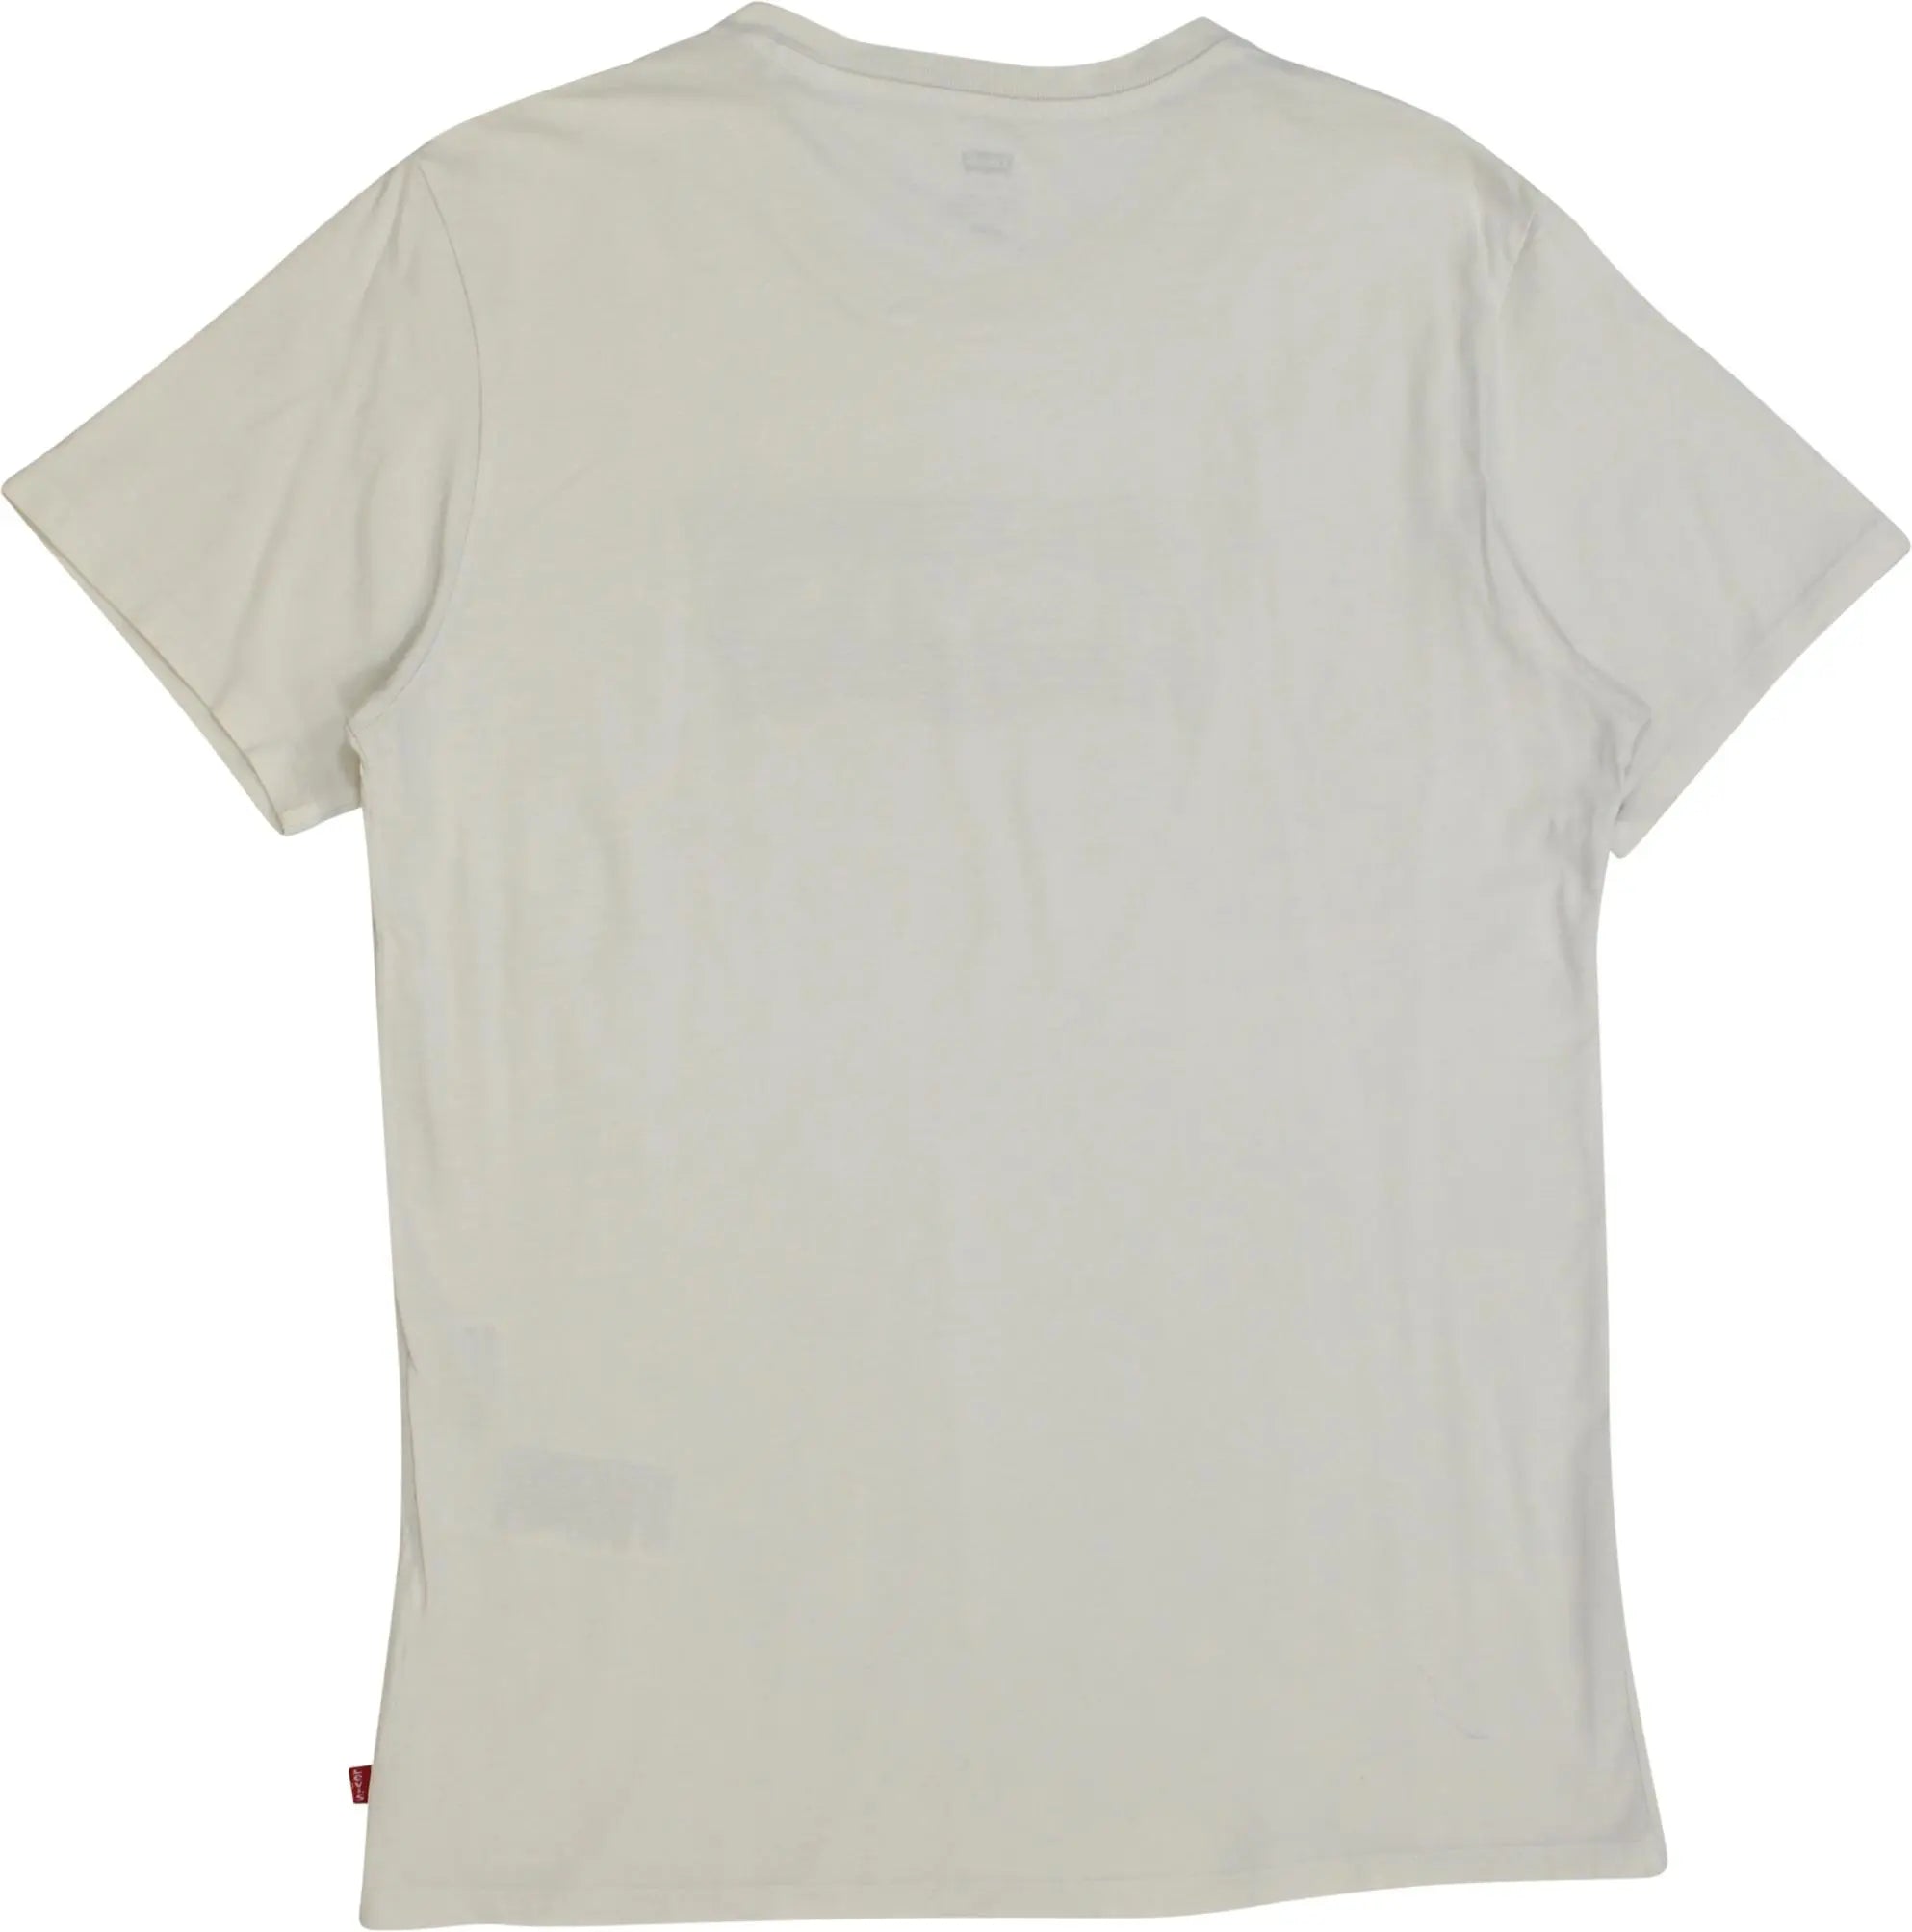 Levi's - White T-shirt by Levi's- ThriftTale.com - Vintage and second handclothing